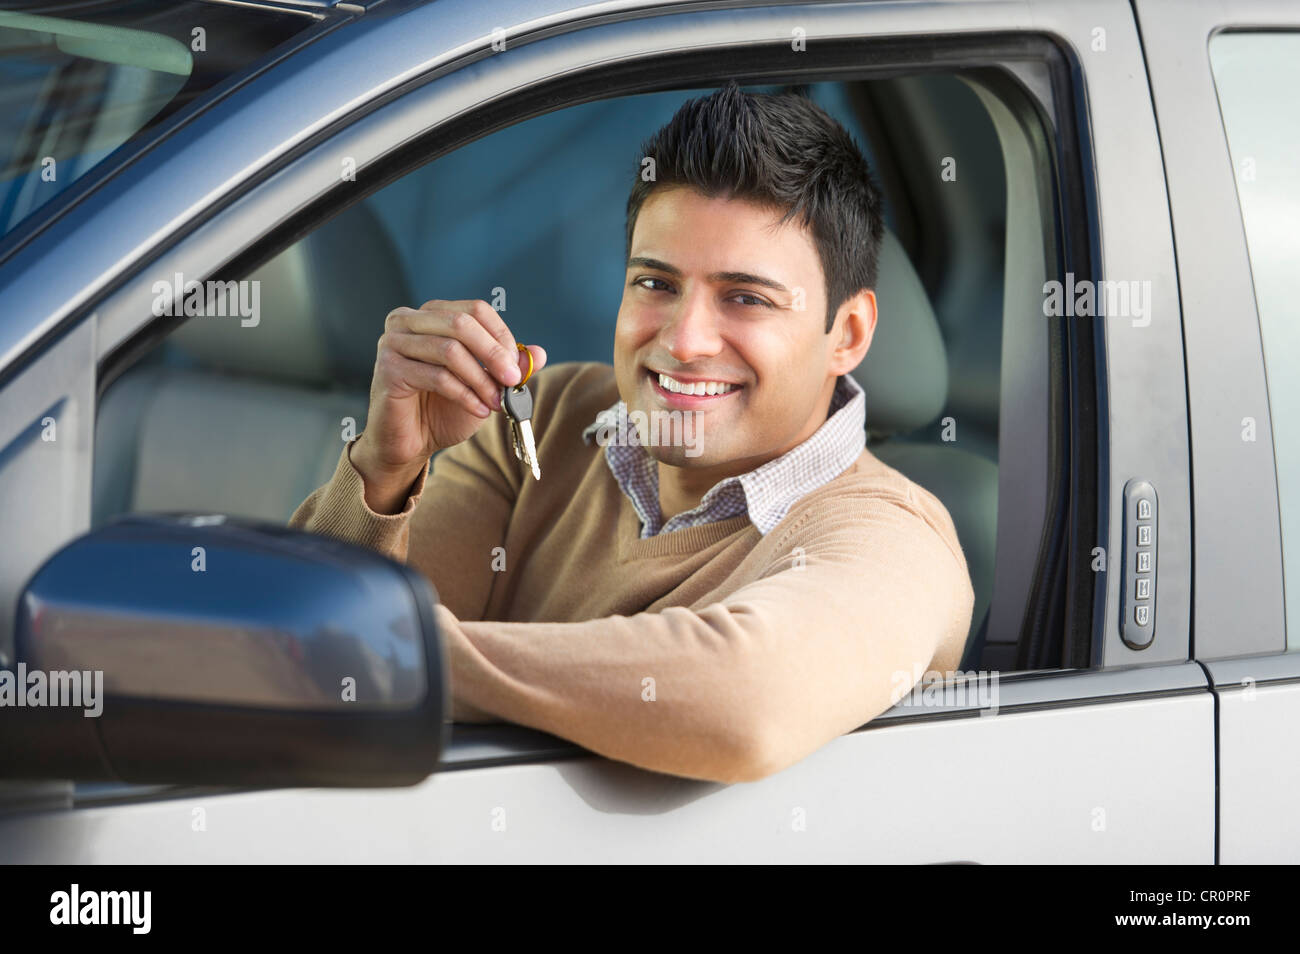 USA, New Jersey, Jersey City, Man sitting in his new car Stock Photo